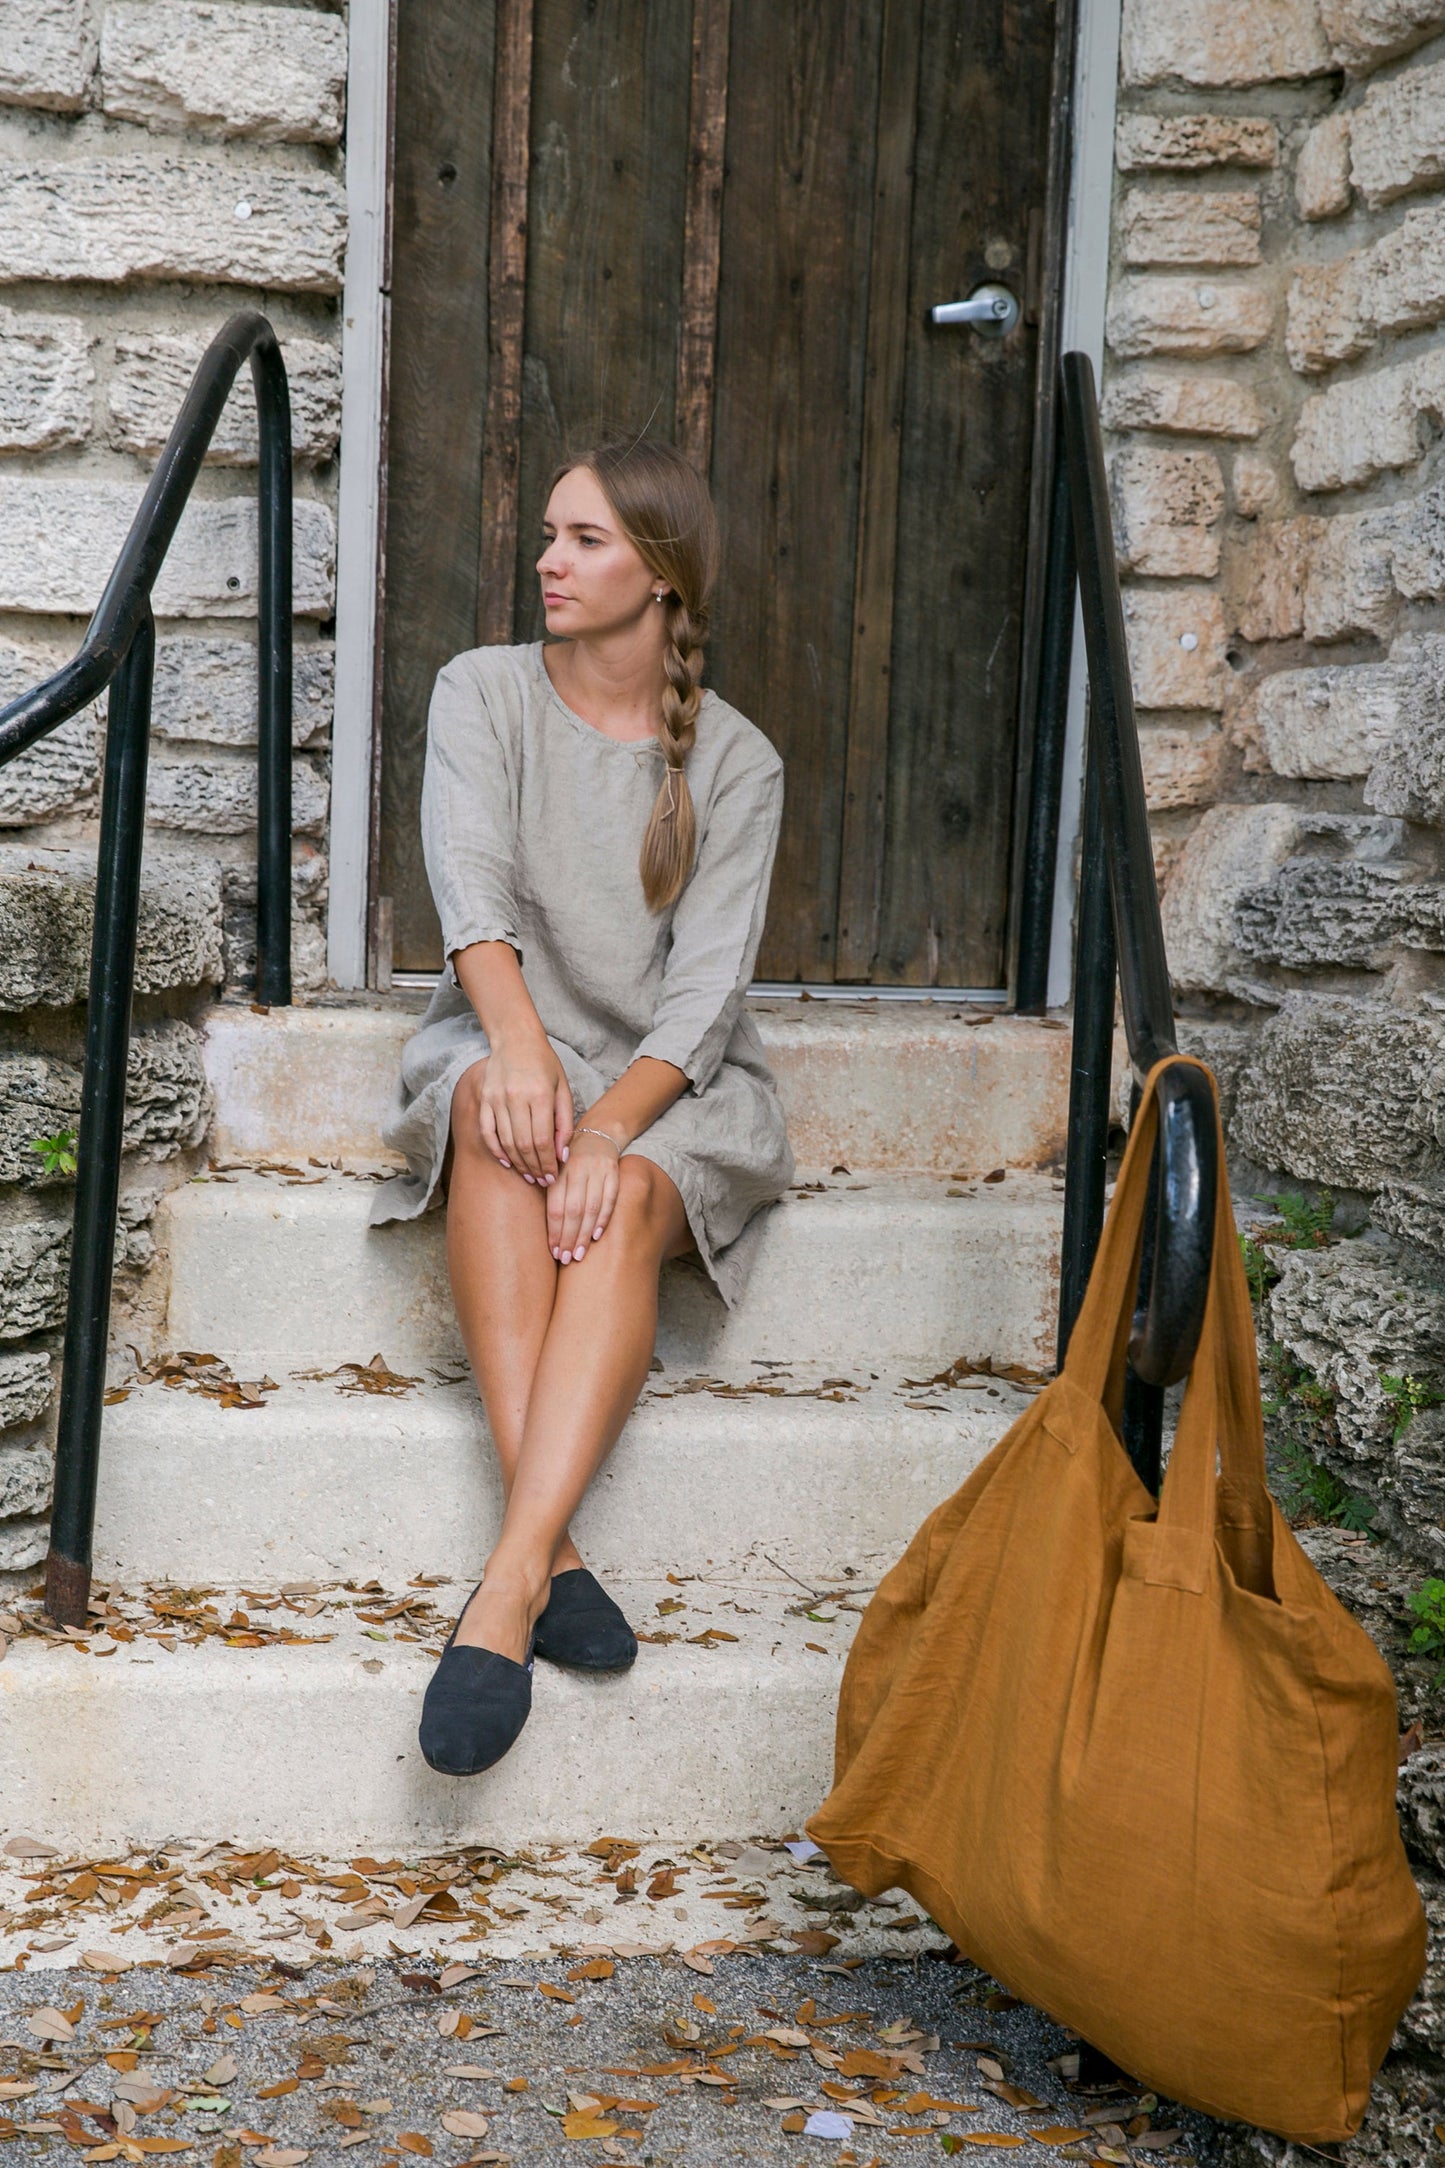 Bohemian elegance: Woman in a soft and oversized linen summer outfit.